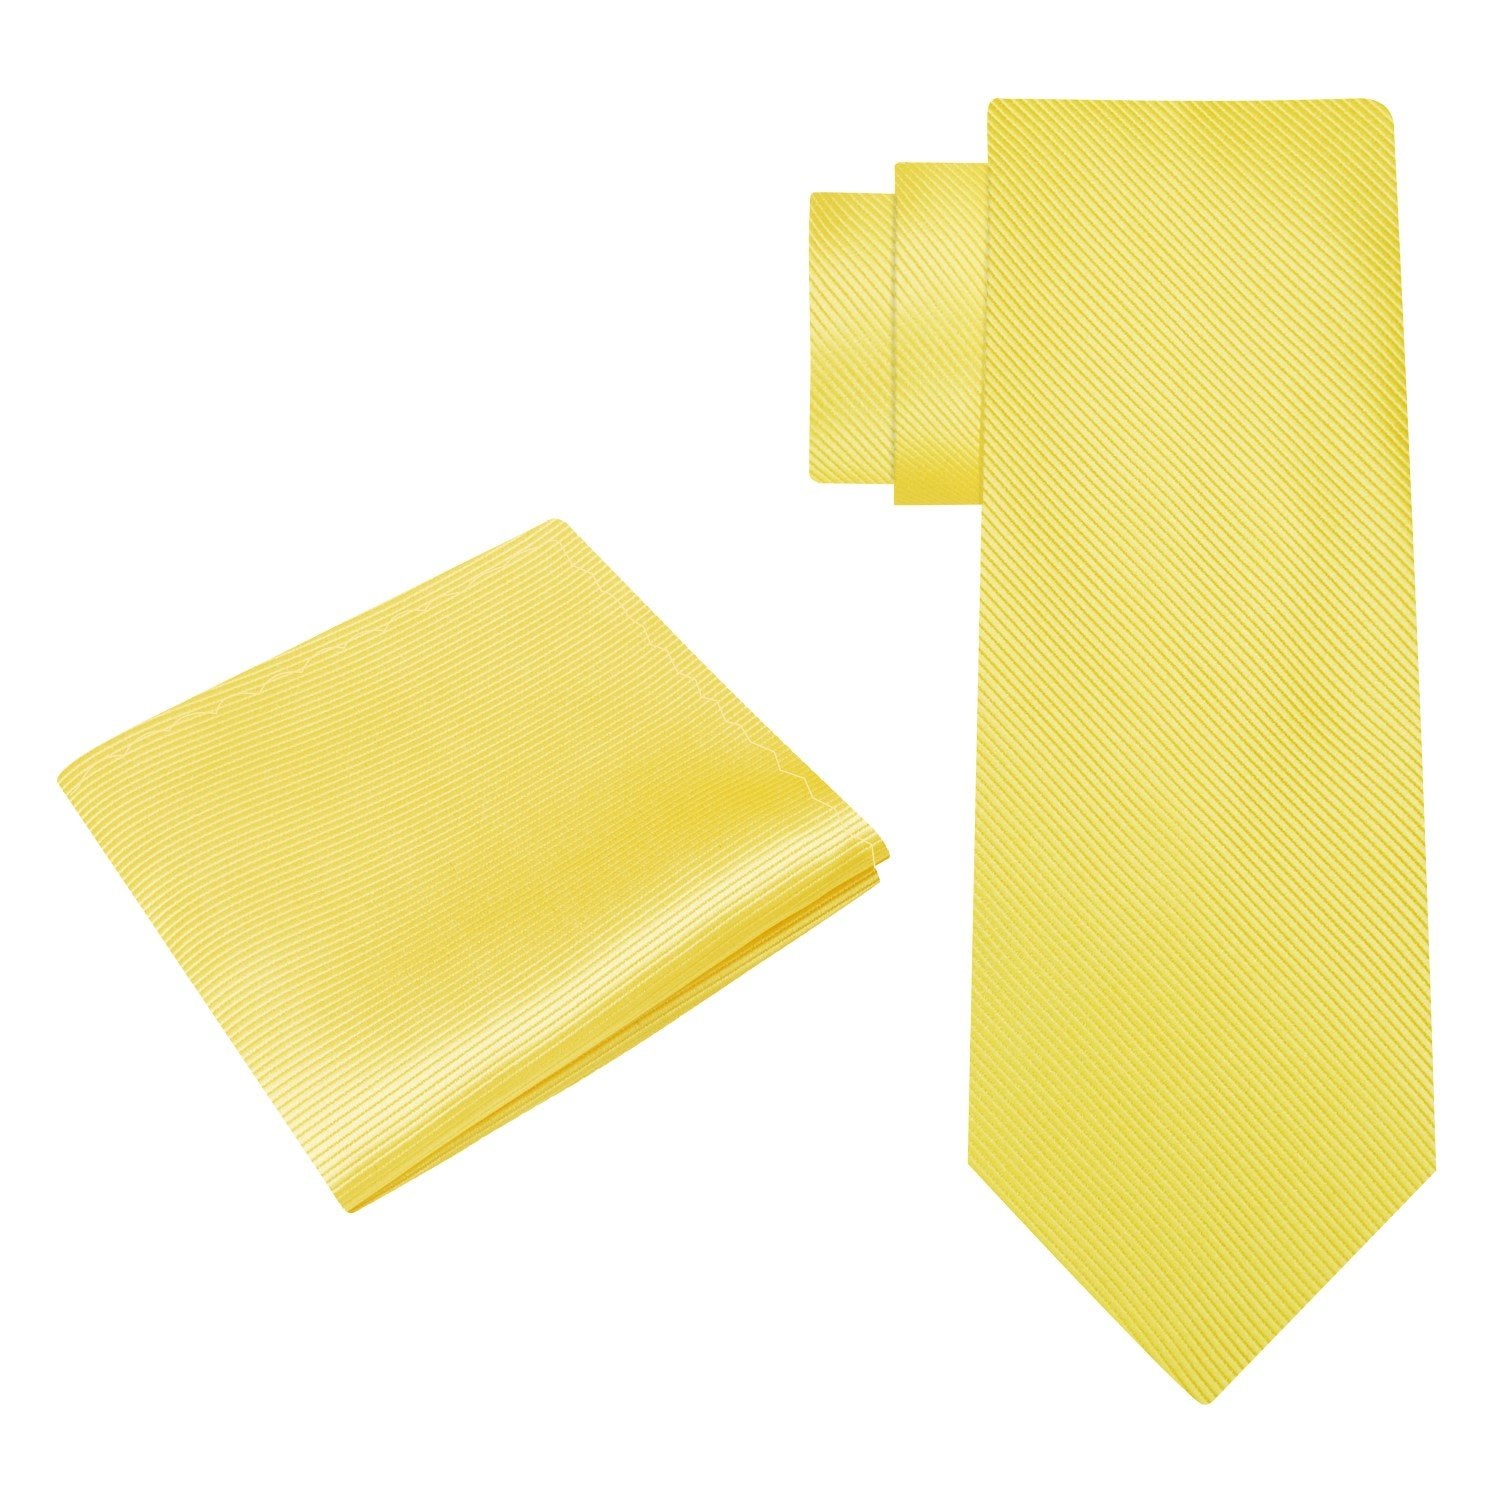 Alt View: Yellow Tie and Pocket Square